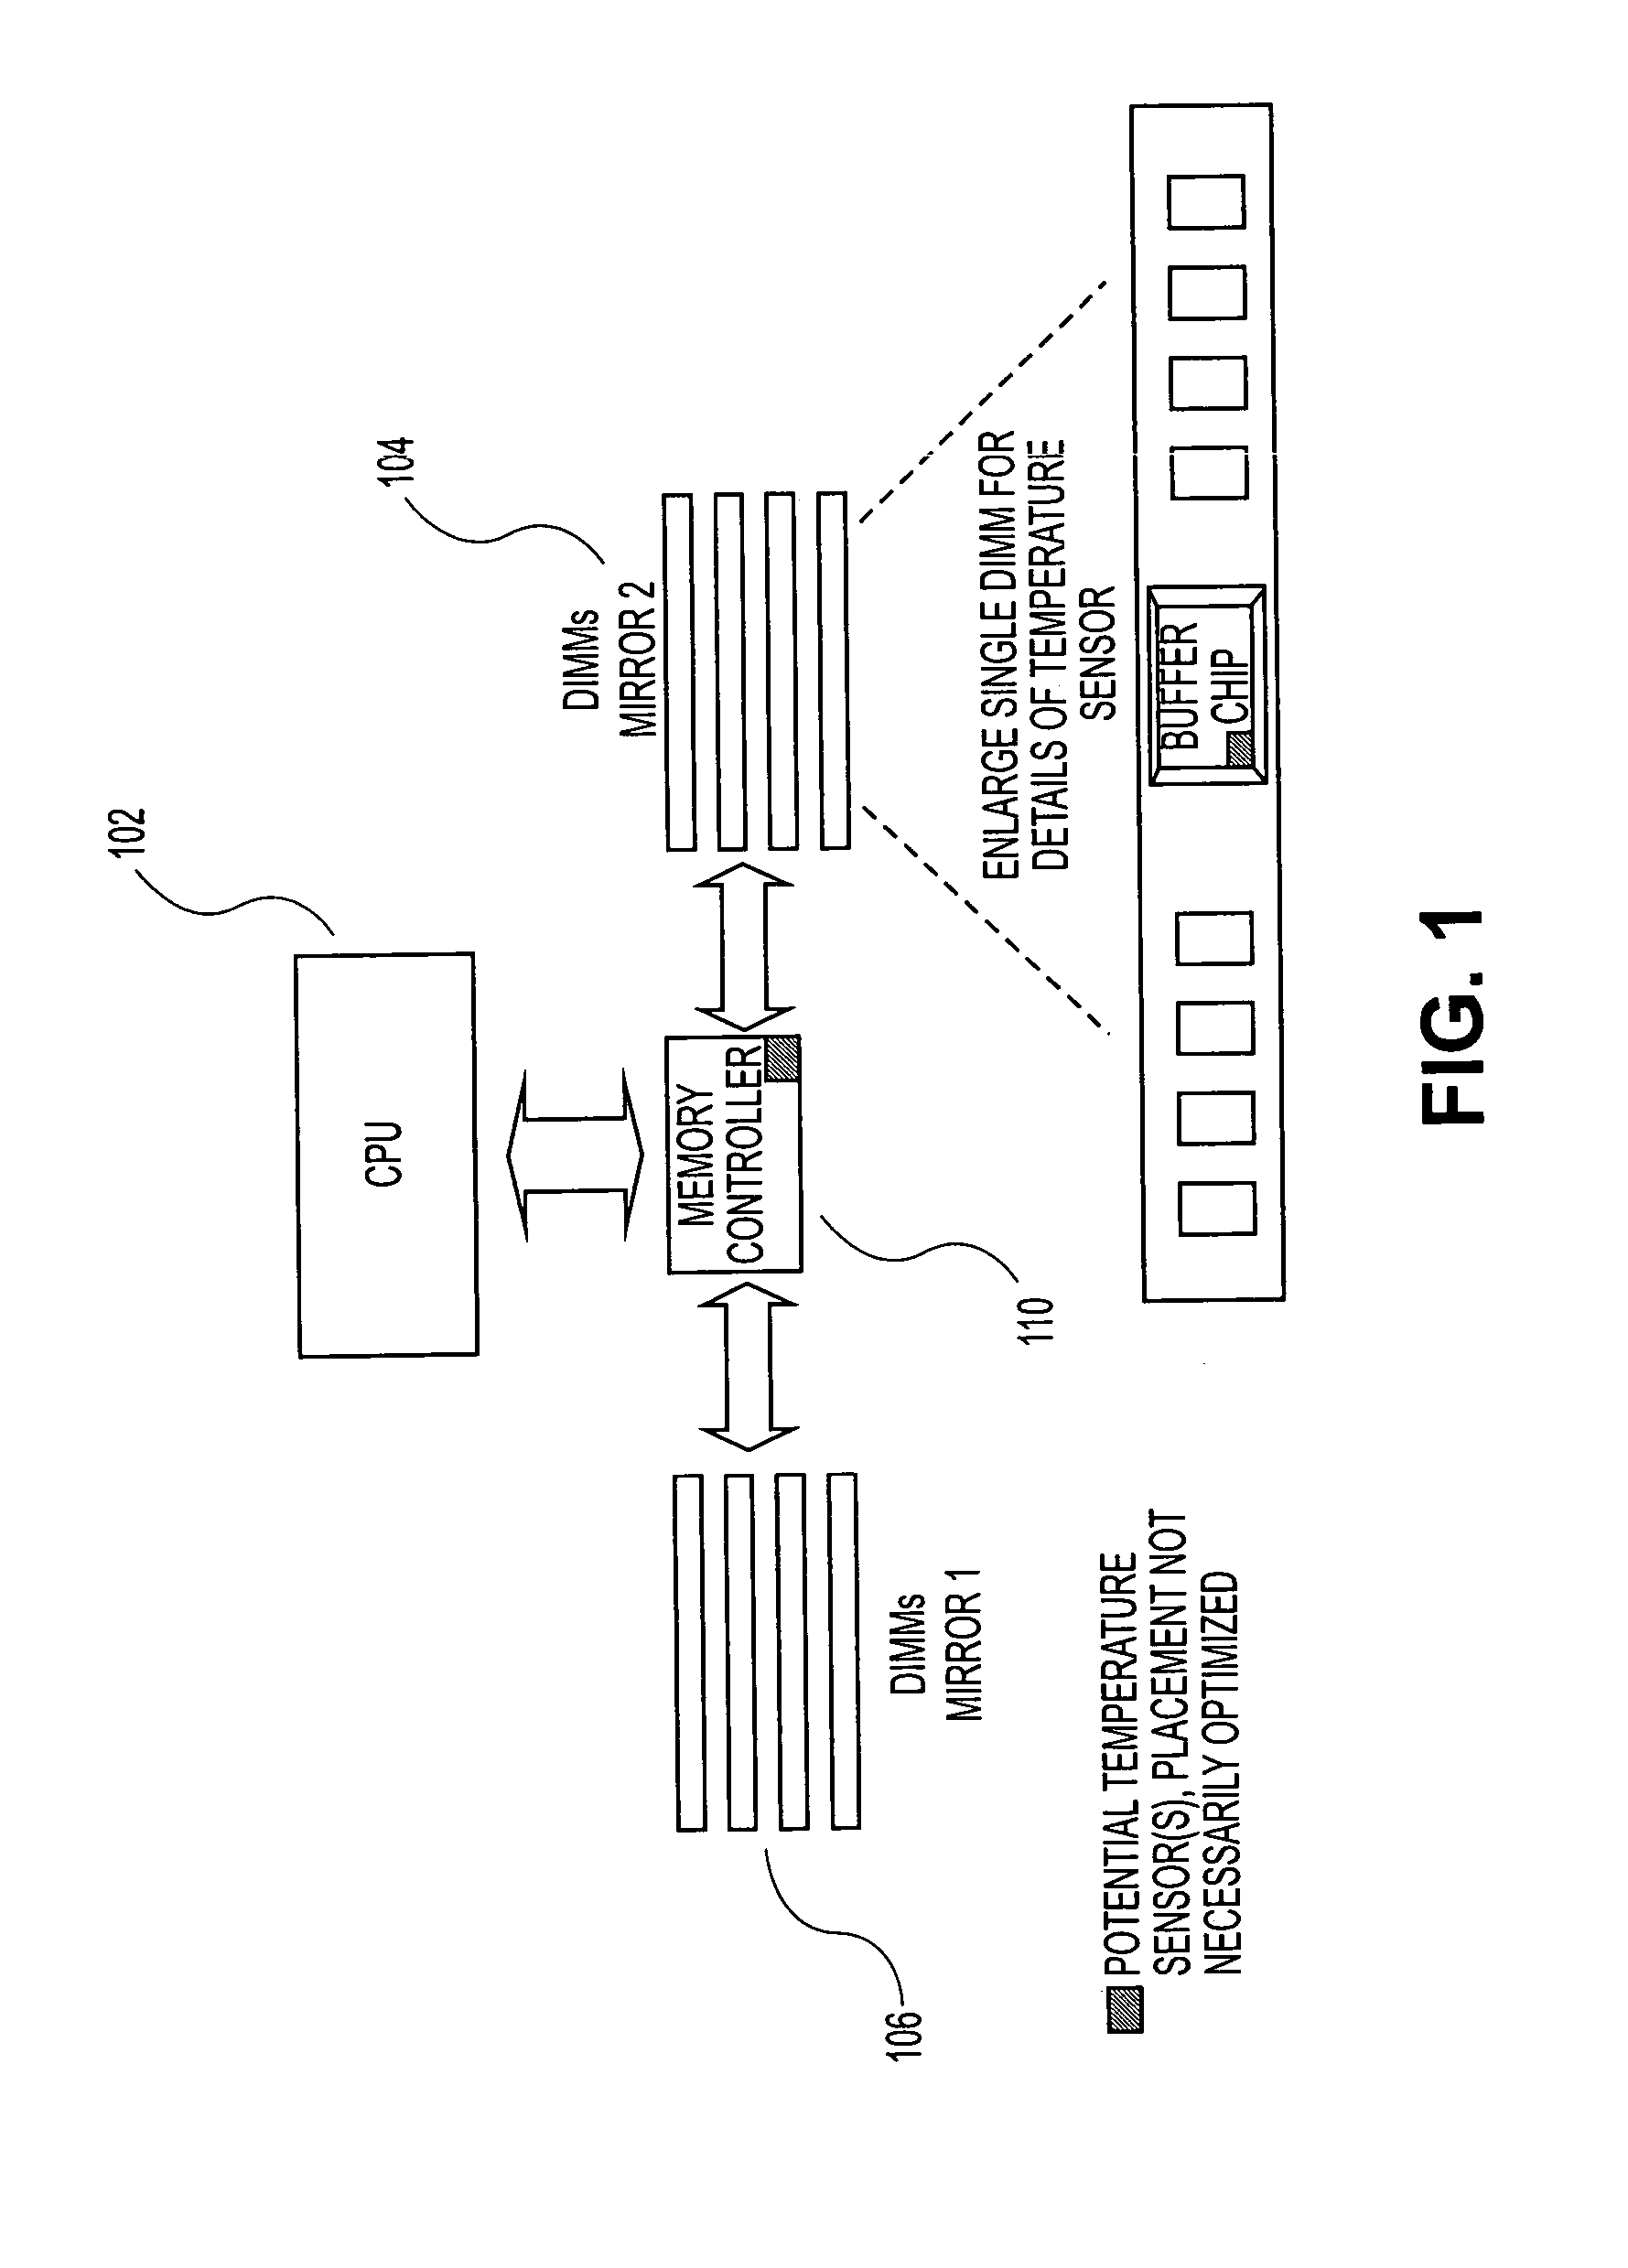 Method, apparatus, and system for memory read transaction biasing in mirrored mode to provide thermal management